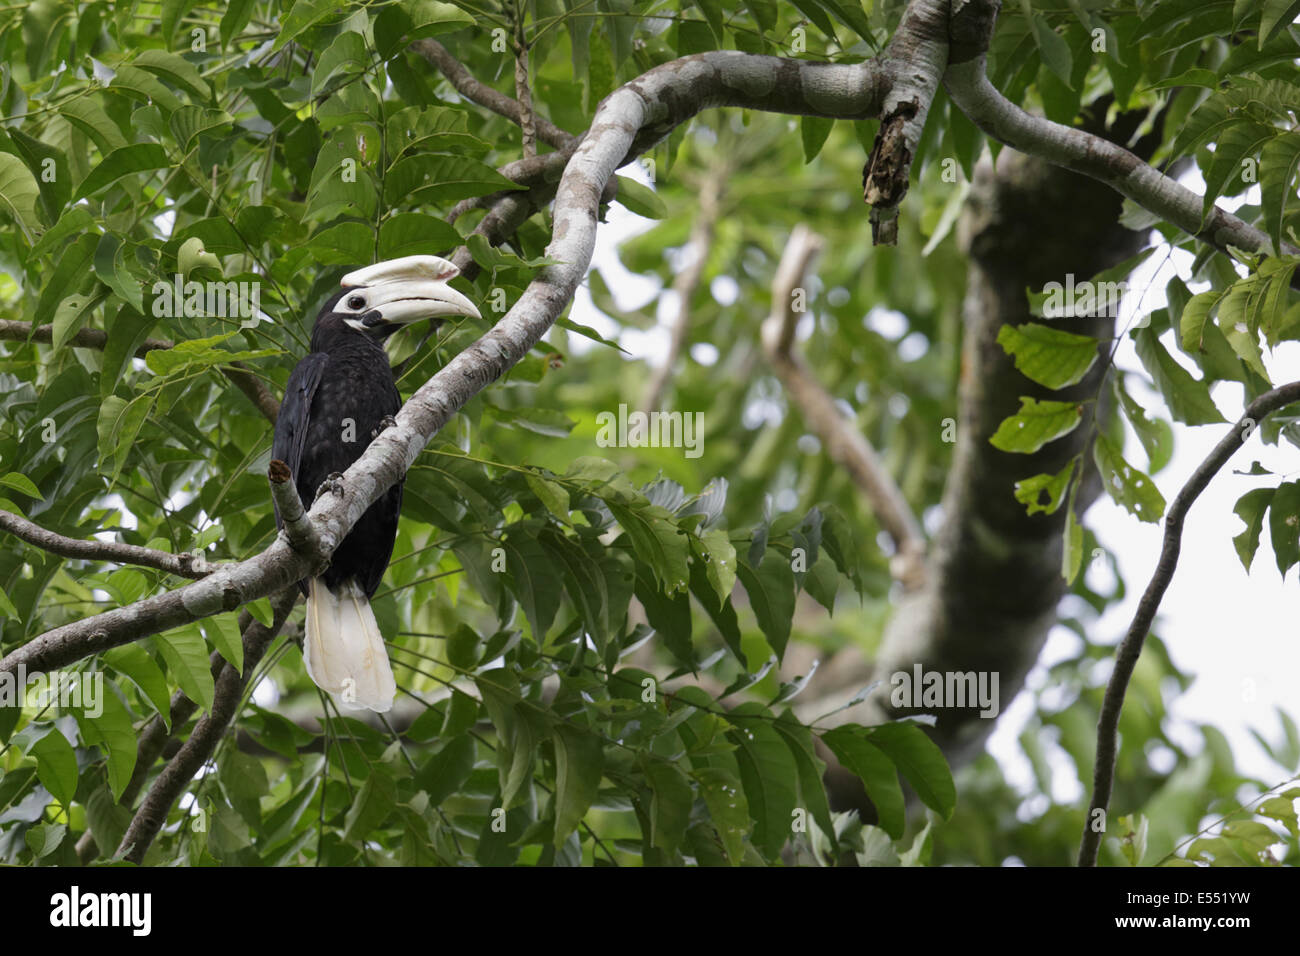 Palawan Hornbill (Anthracoceros marchei) adult male, perched on branch in tree, Puerto Princesa Subterranean River N.P., Saint Paul Mountain Range, Palawan, Philippines, June Stock Photo